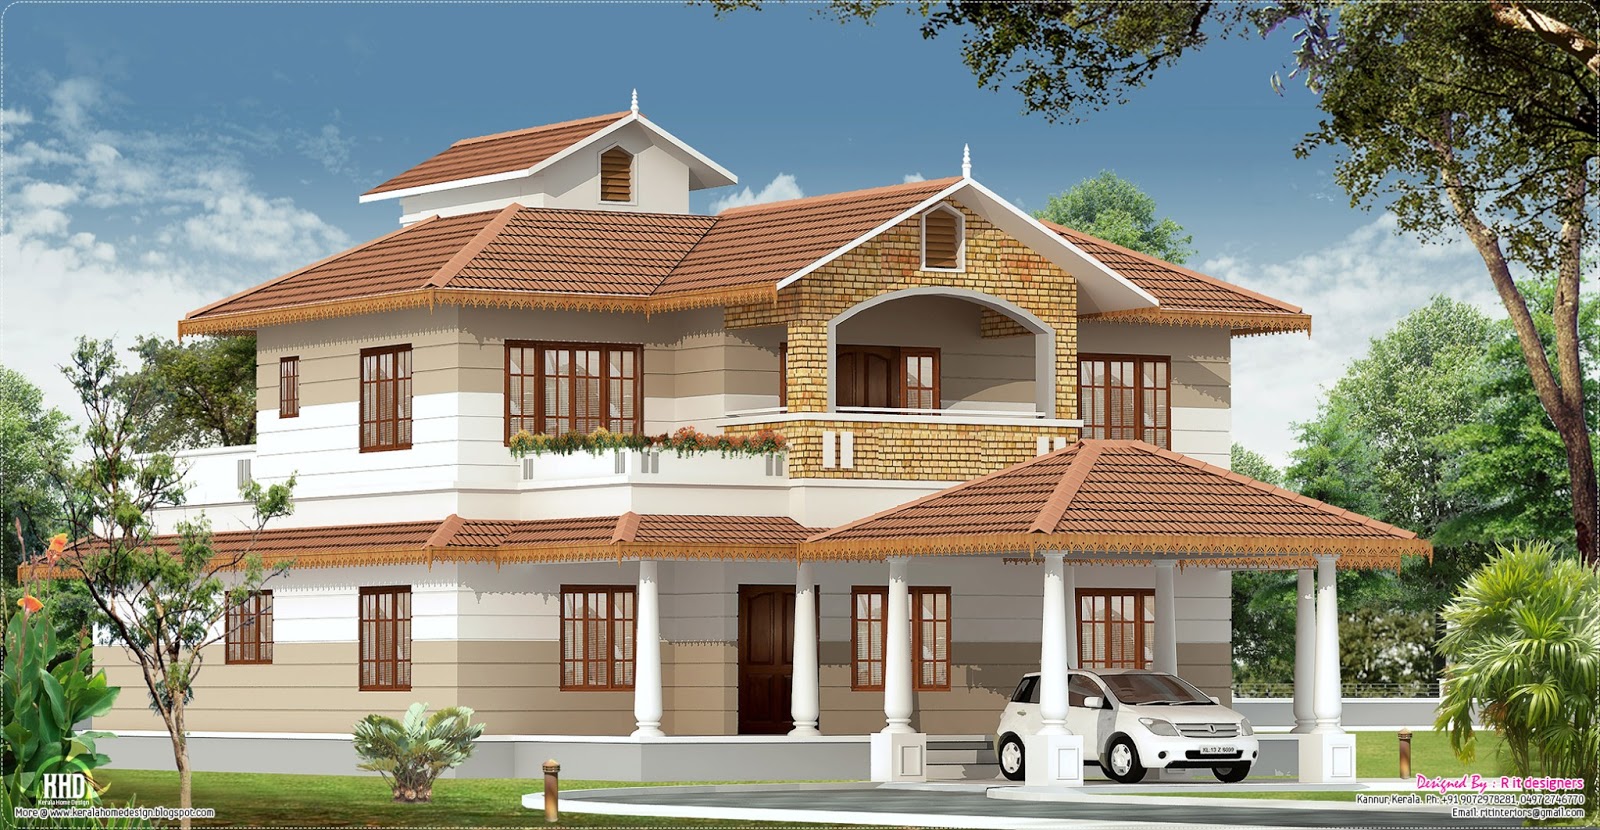 2700 sq.feet Kerala home with interior designs | House Design Plans